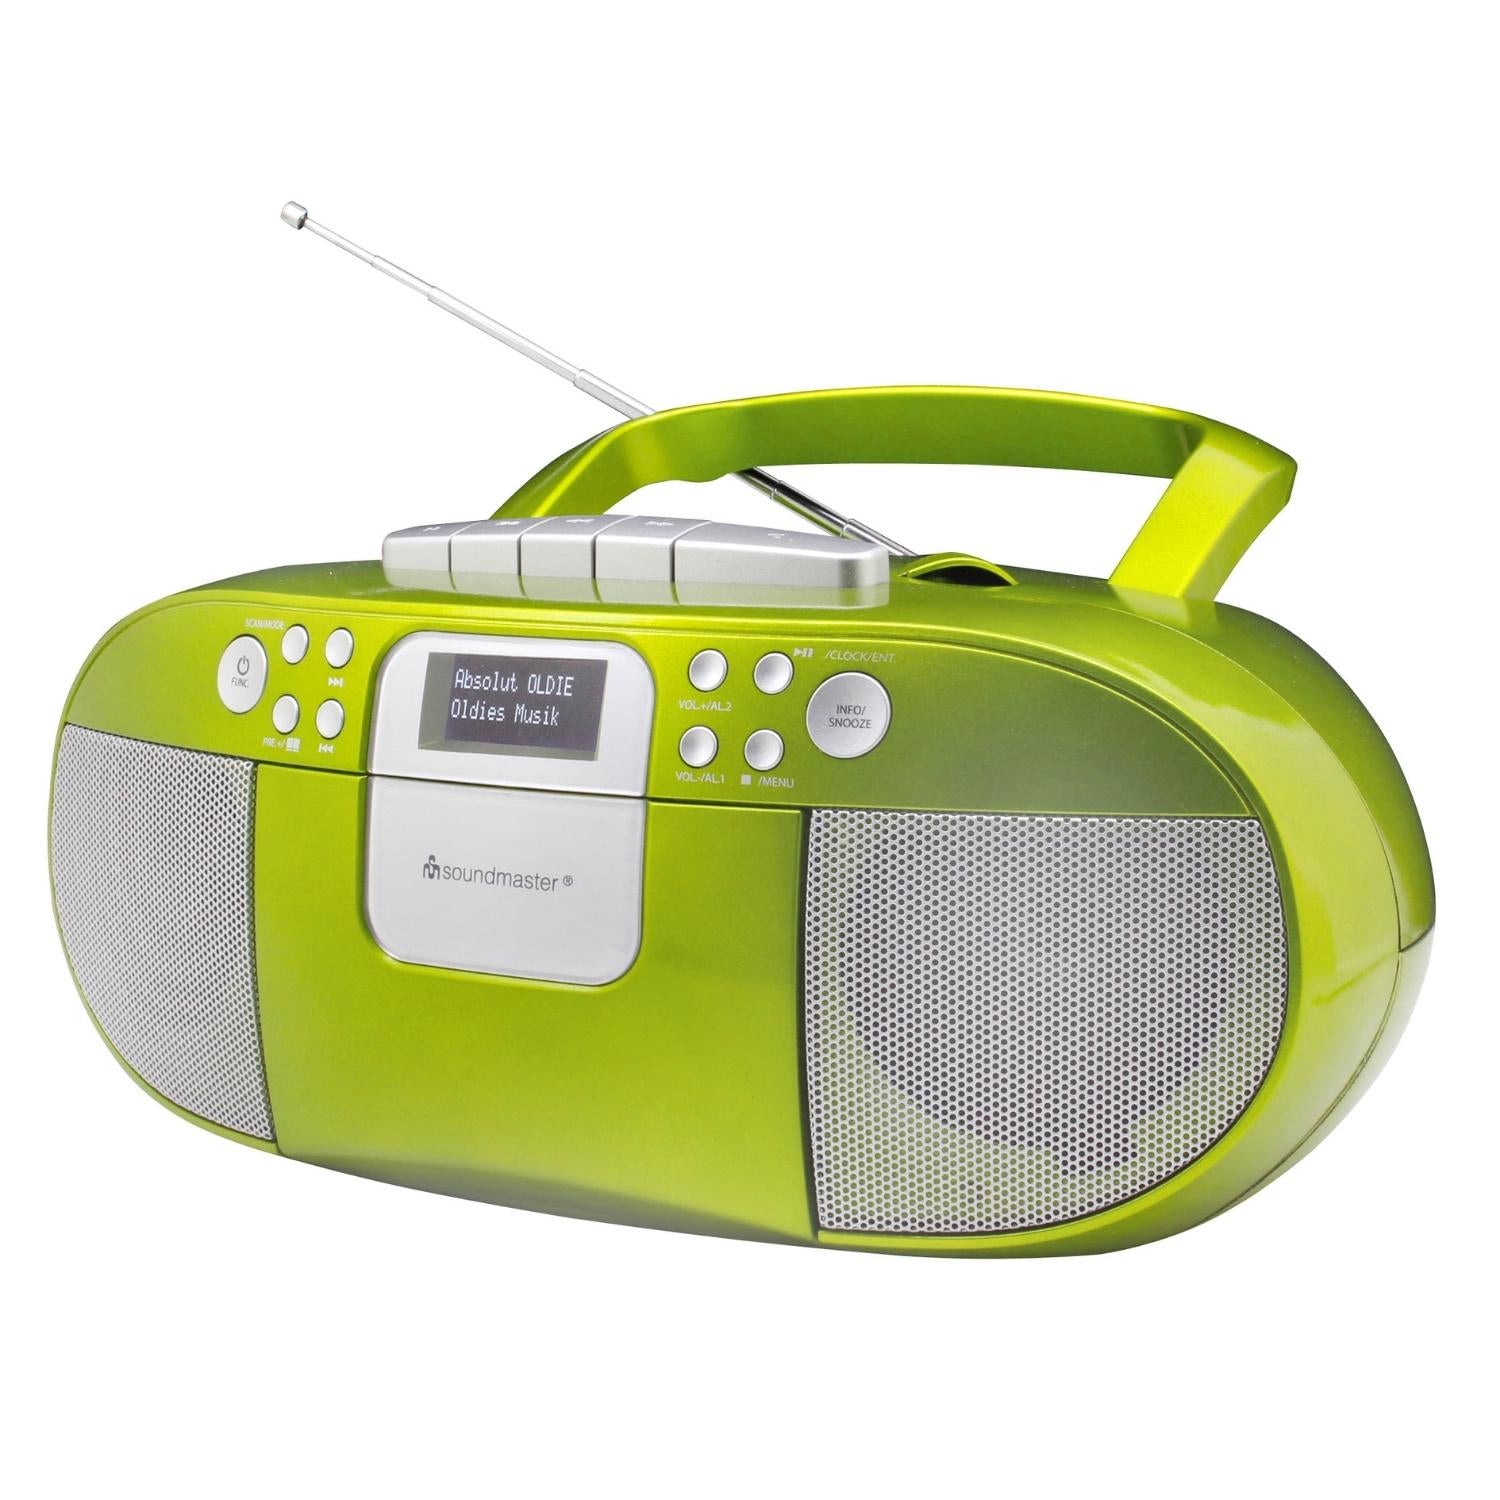 Soundmaster SCD7800GR Boombox DAB+ CD MP3 cassette recorder with USB alarm clock function, audio book function